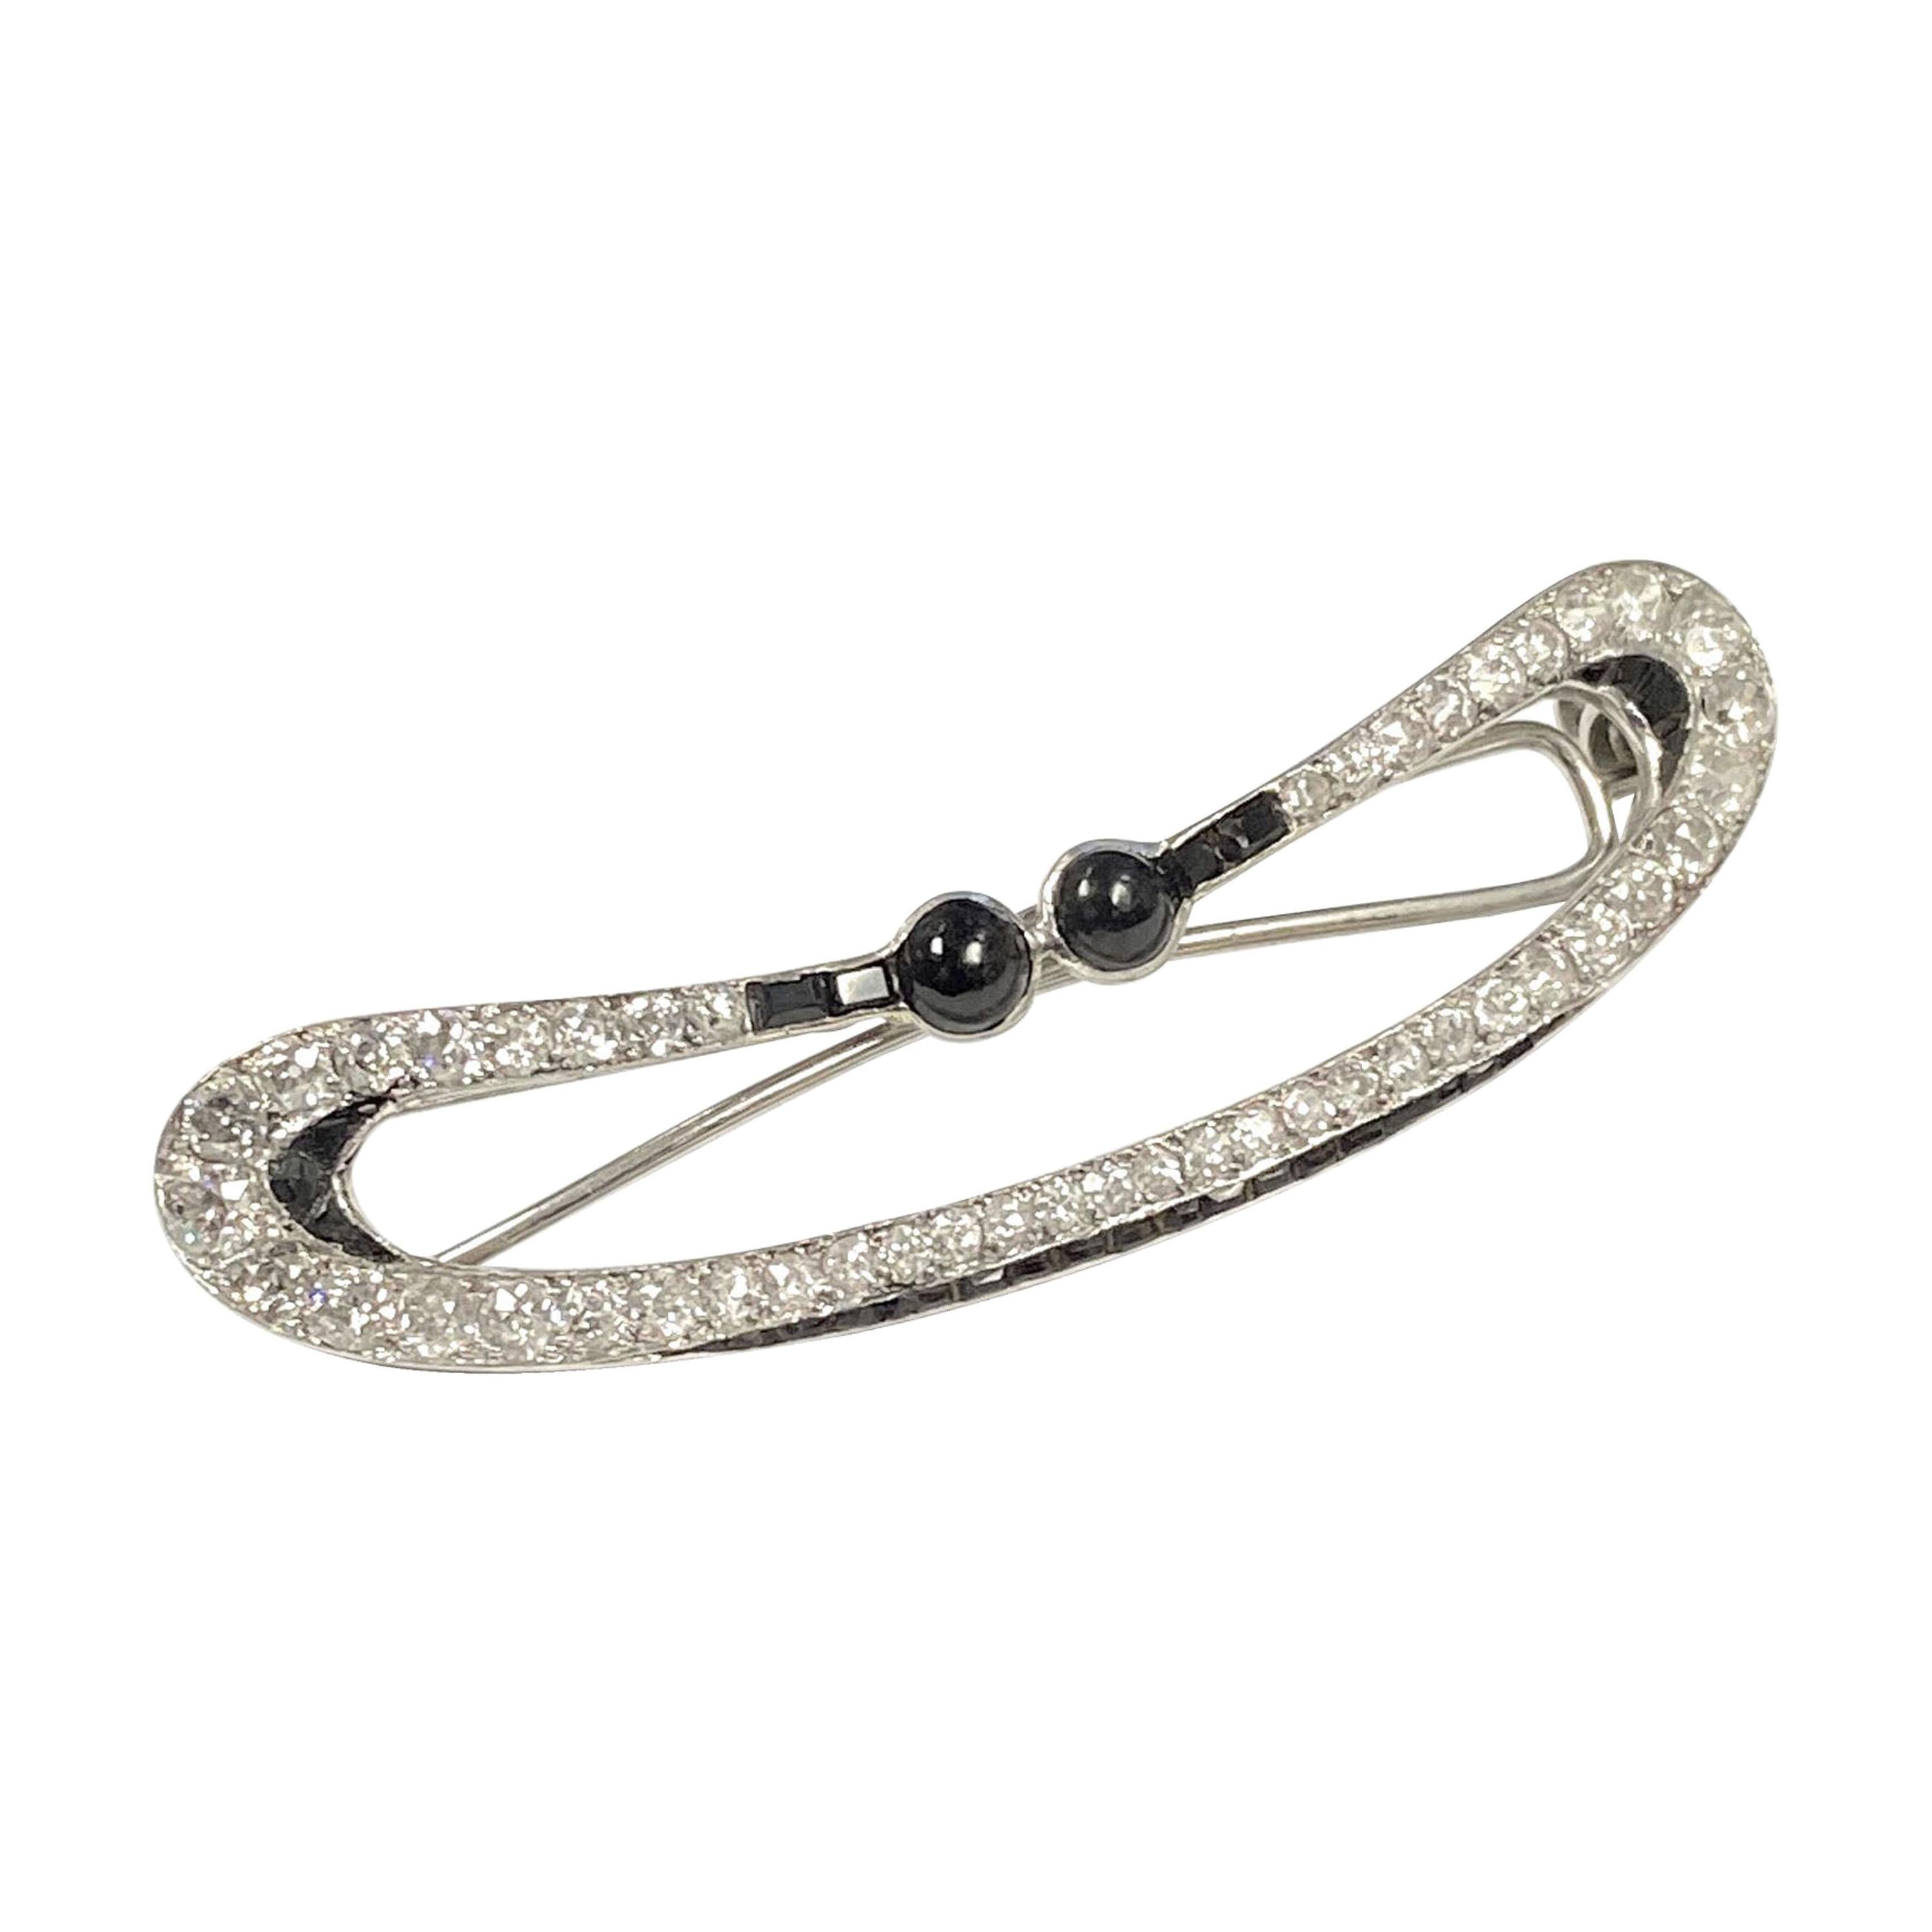 Circa 1930s Lacloche Freres Platinum Hair Barrette, measuring 2 3/8 inches in length X 1/2 inch wide, set with Old cut Diamonds totaling 2 Carats and further set with Onyx. 